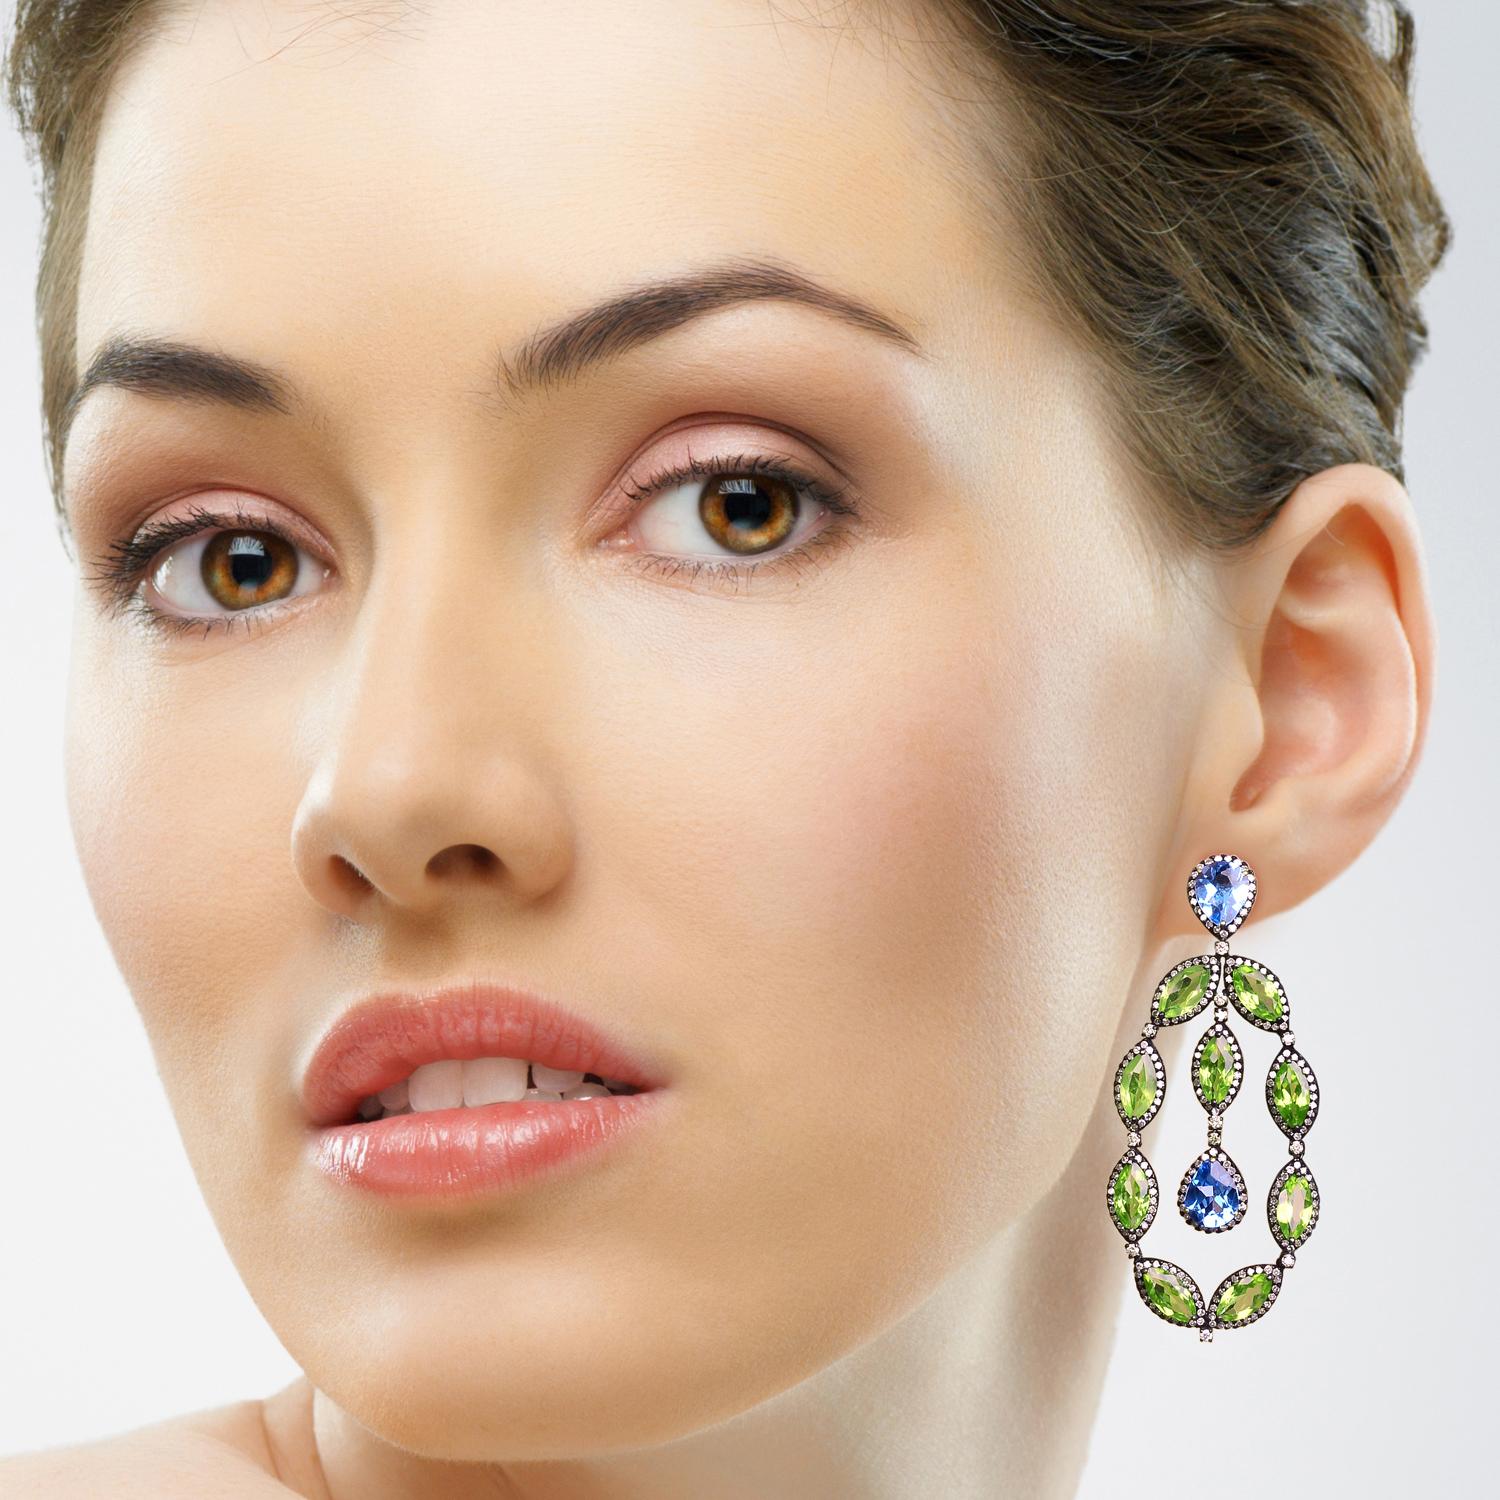 Handcrafted from 14-karat gold and sterling silver, these beautiful earrings are set with 8.3 carats topaz, 17.37 carats peridot and 4.03 carats glimmering diamonds.

FOLLOW  MEGHNA JEWELS storefront to view the latest collection & exclusive pieces.